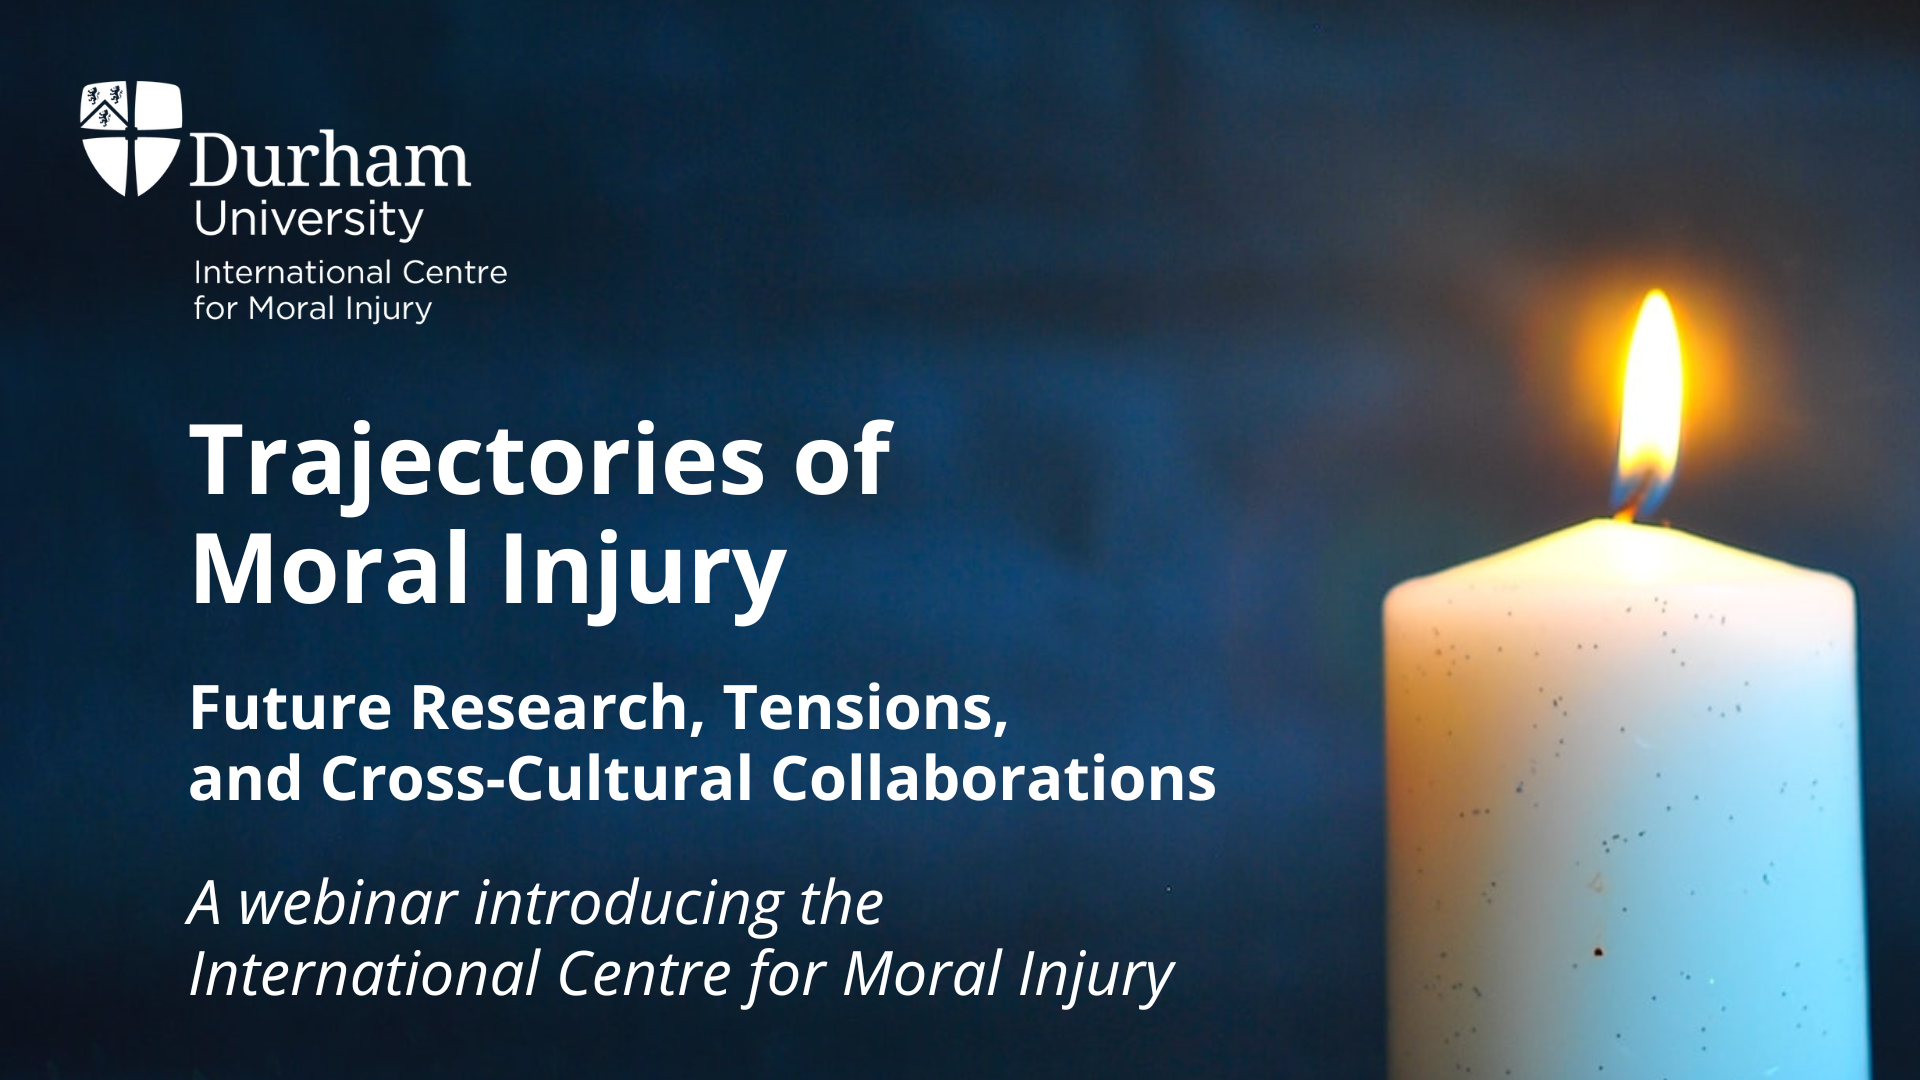 Trajectories of moral injury: A webinar introducing the International Centre for Moral Injury